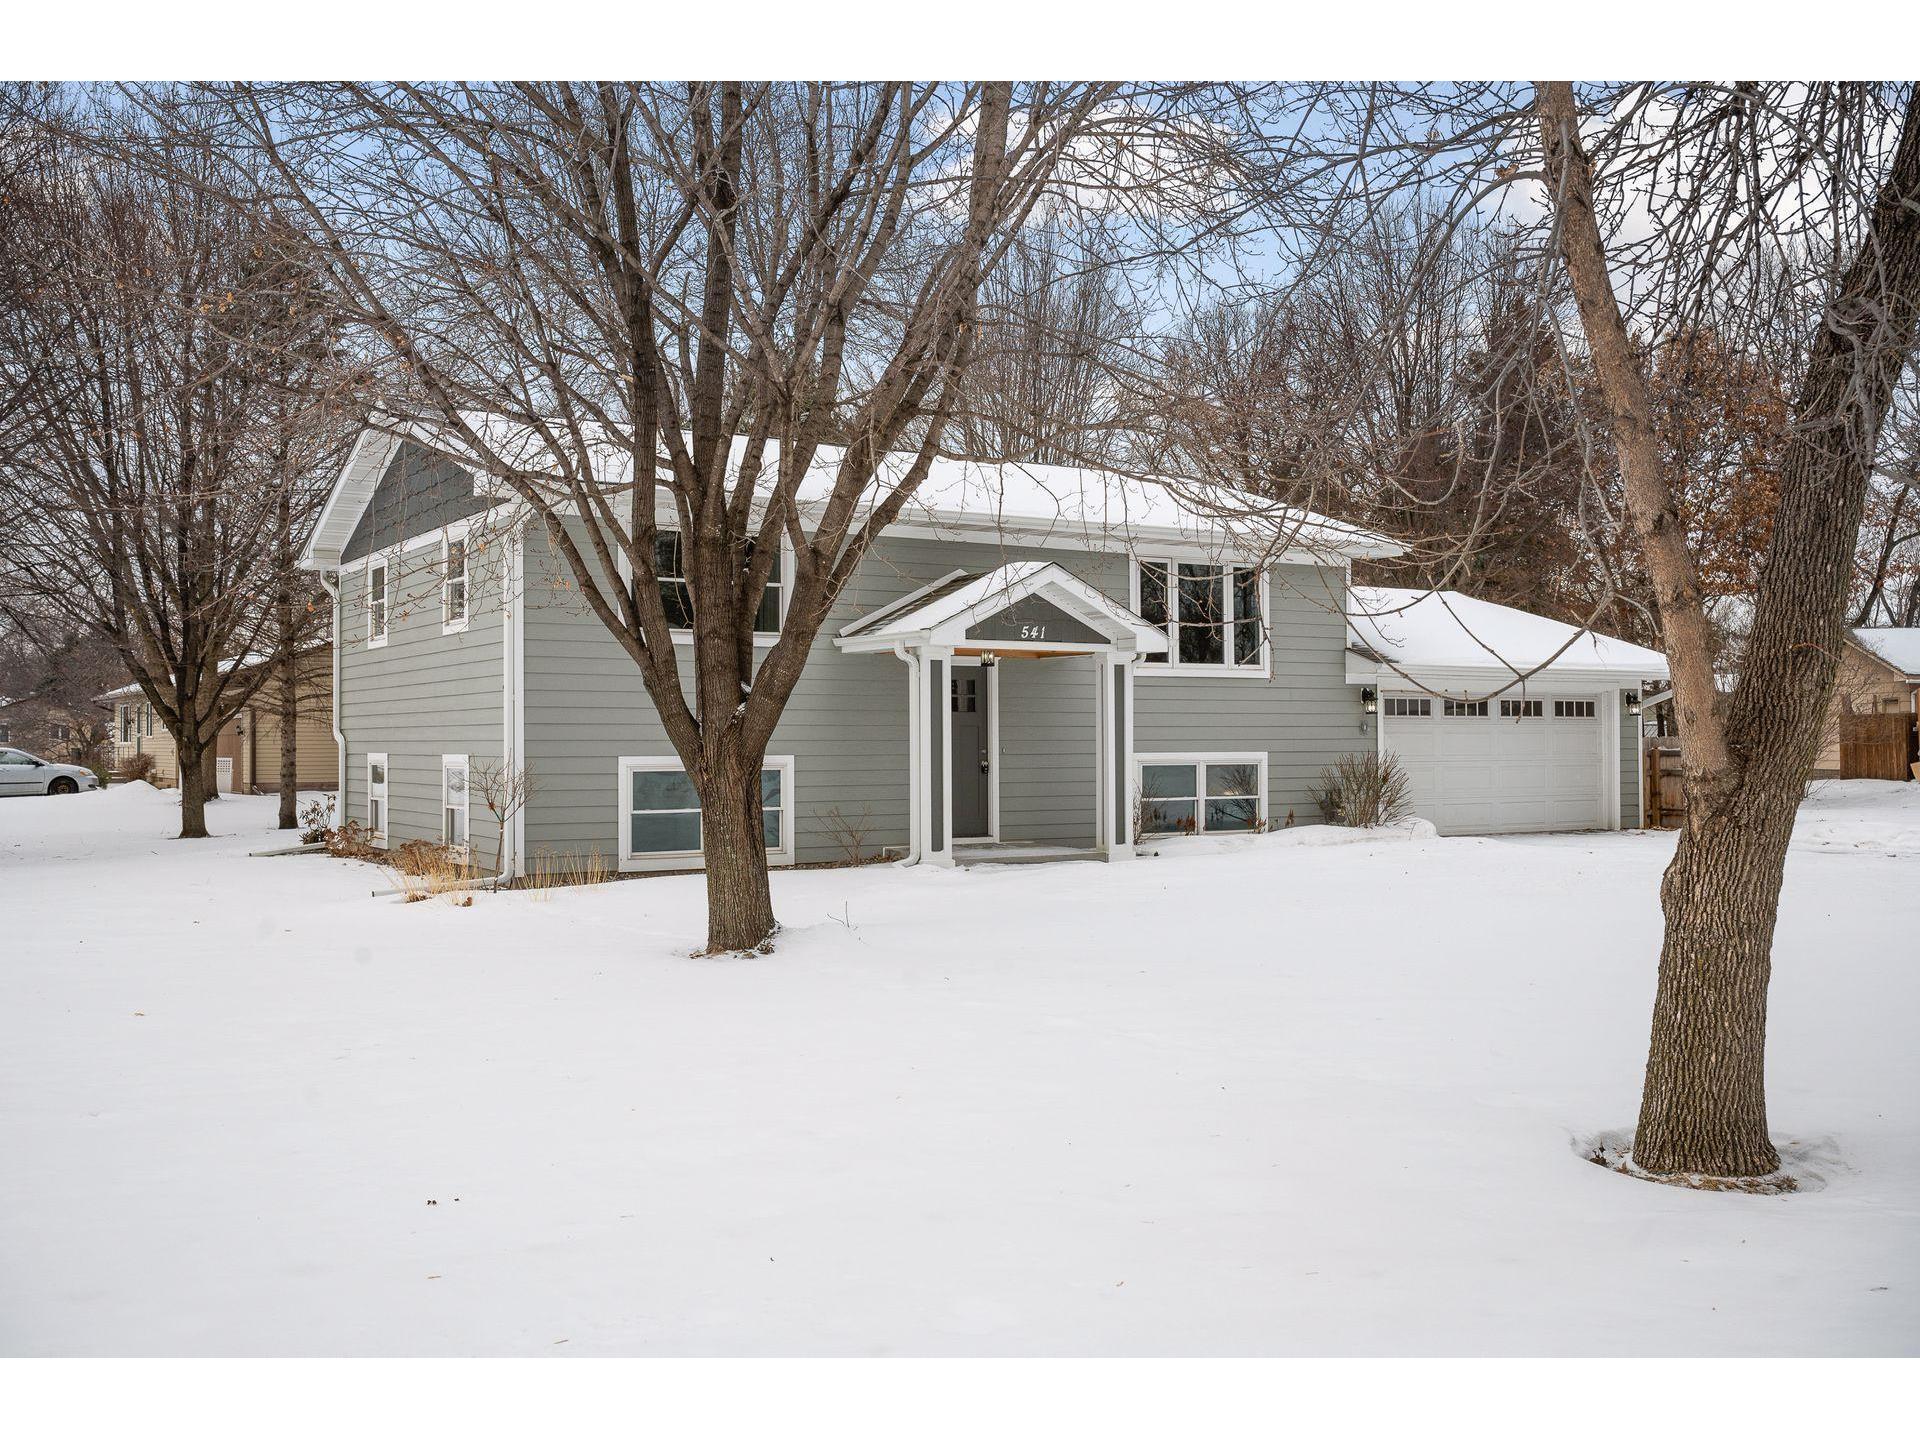 541 106th Avenue NW Coon Rapids MN 55448 6151973 image1